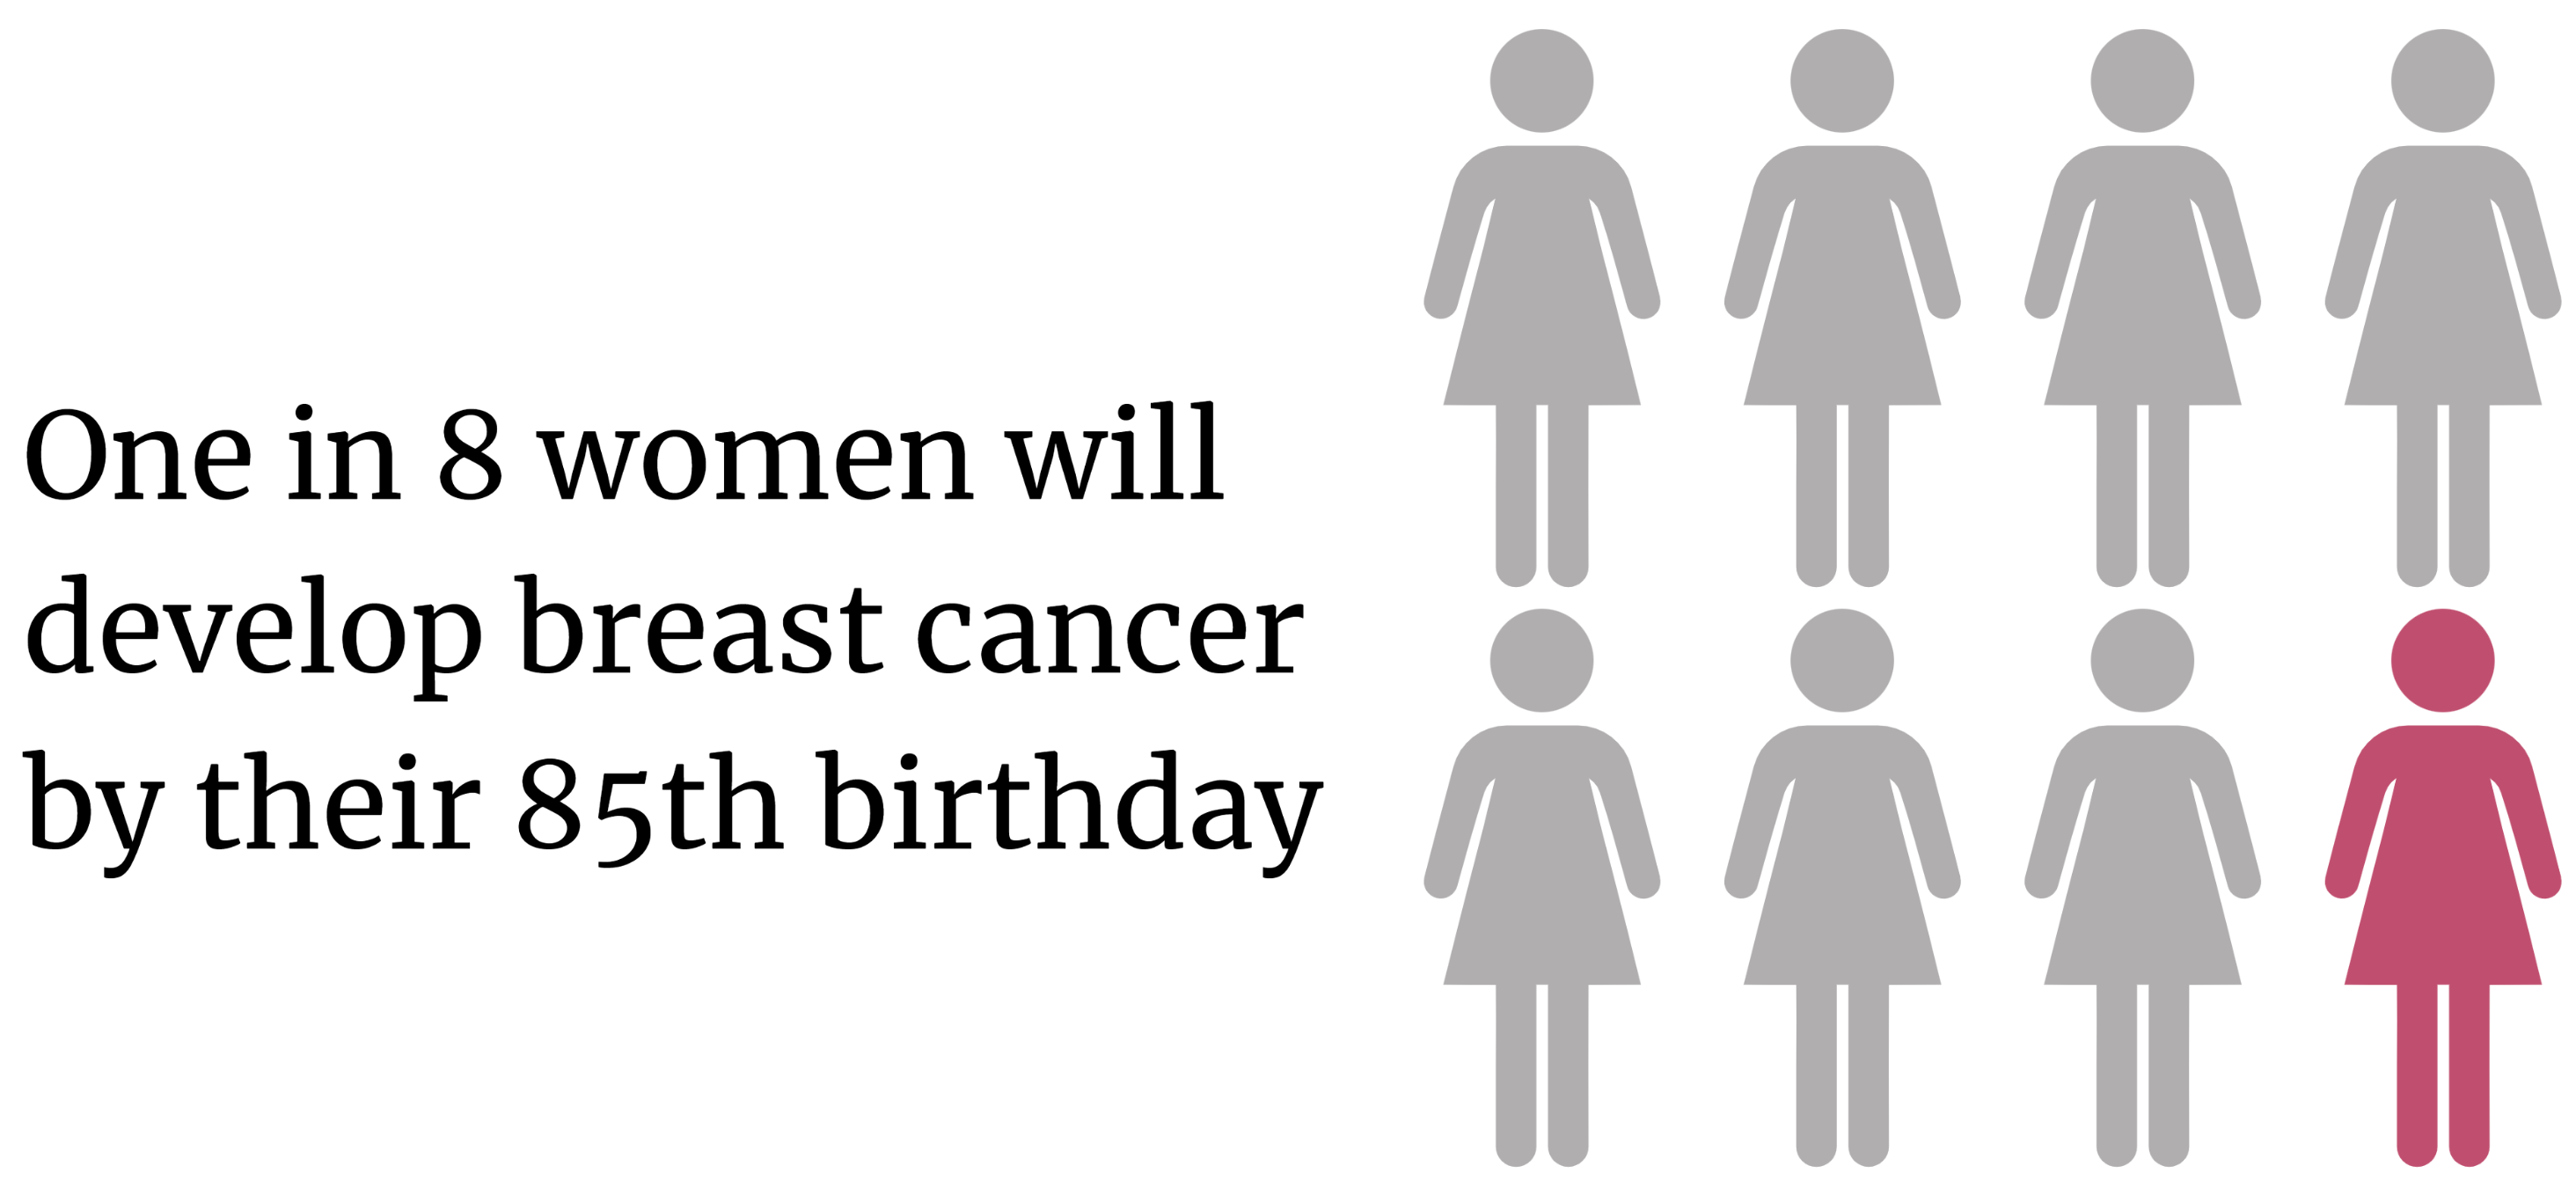 Text: 1 in 8 women will develop breast cancer before their 85th birthday